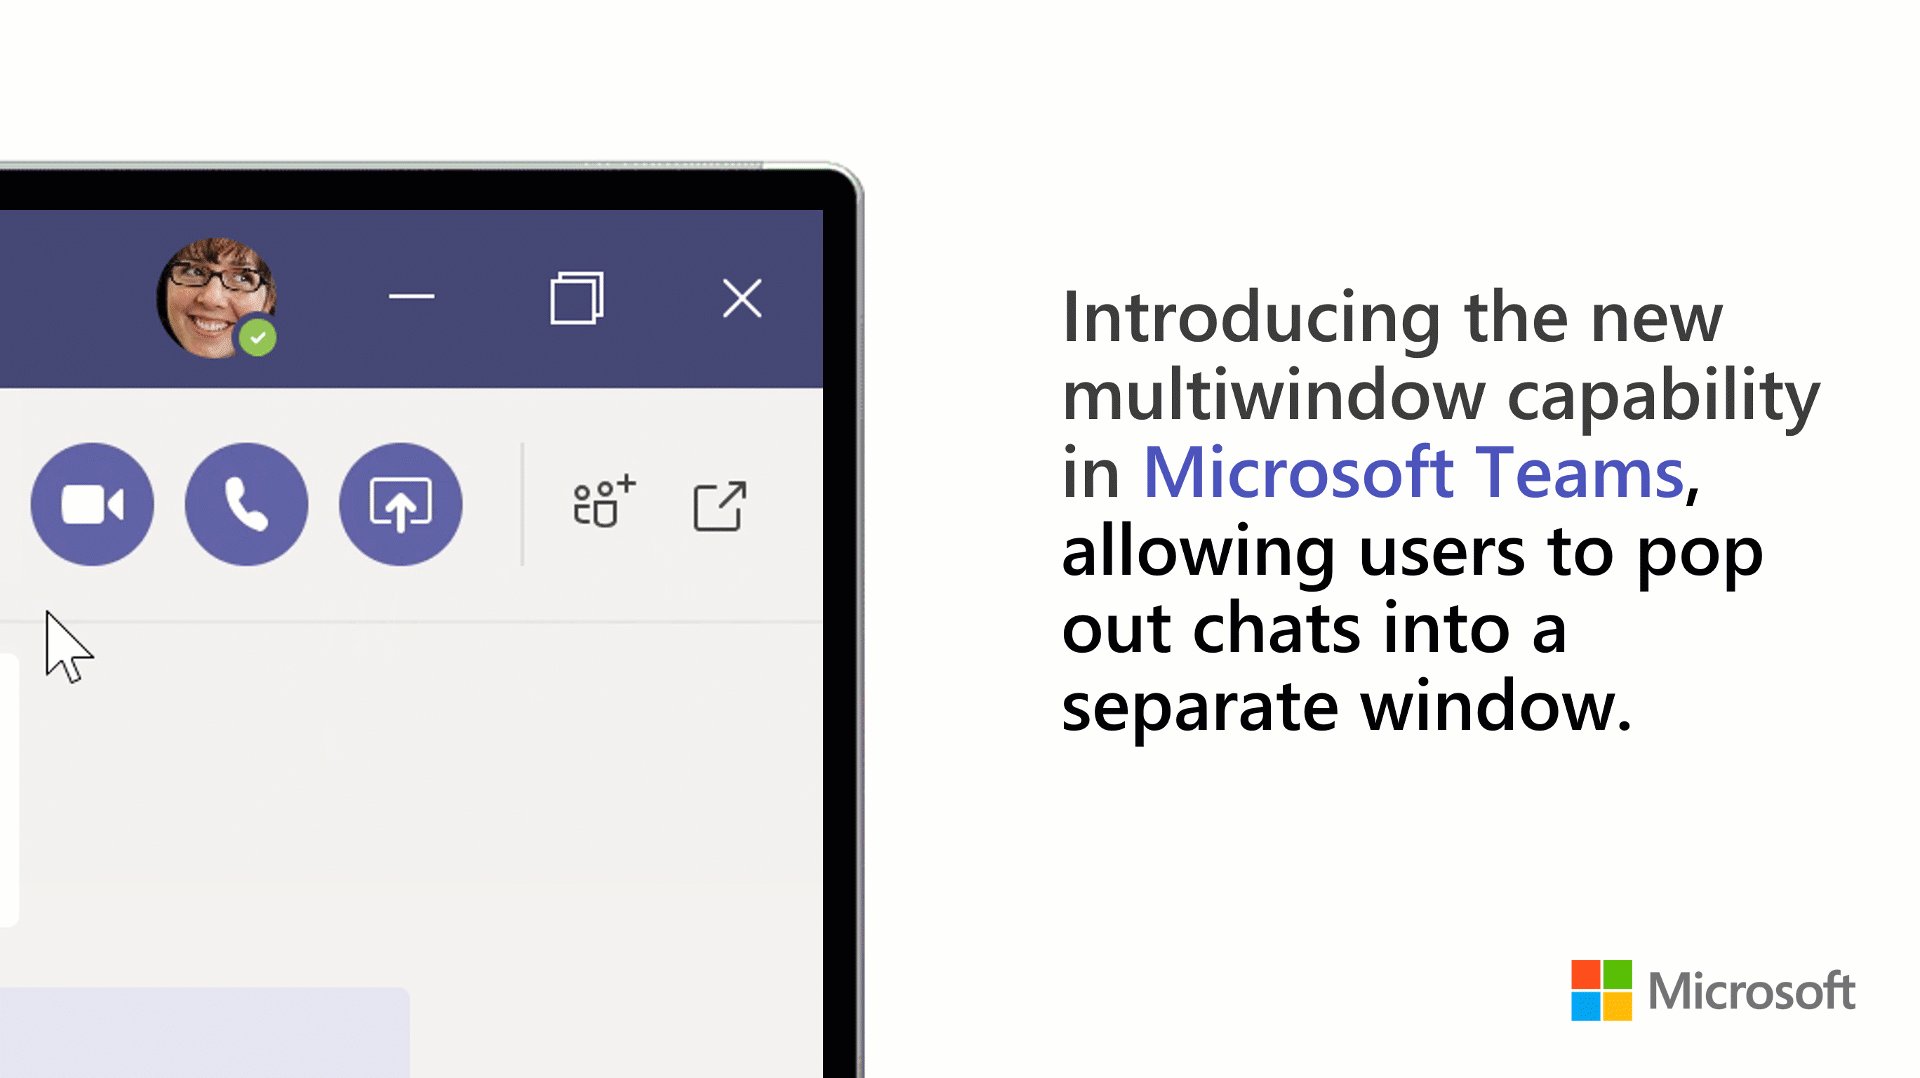 Teams on Twitter: "Pop out chats into a separate window in # MicrosoftTeams and keep the conversation going while working in Teams – rolling out early next year! Explore new multiwindow